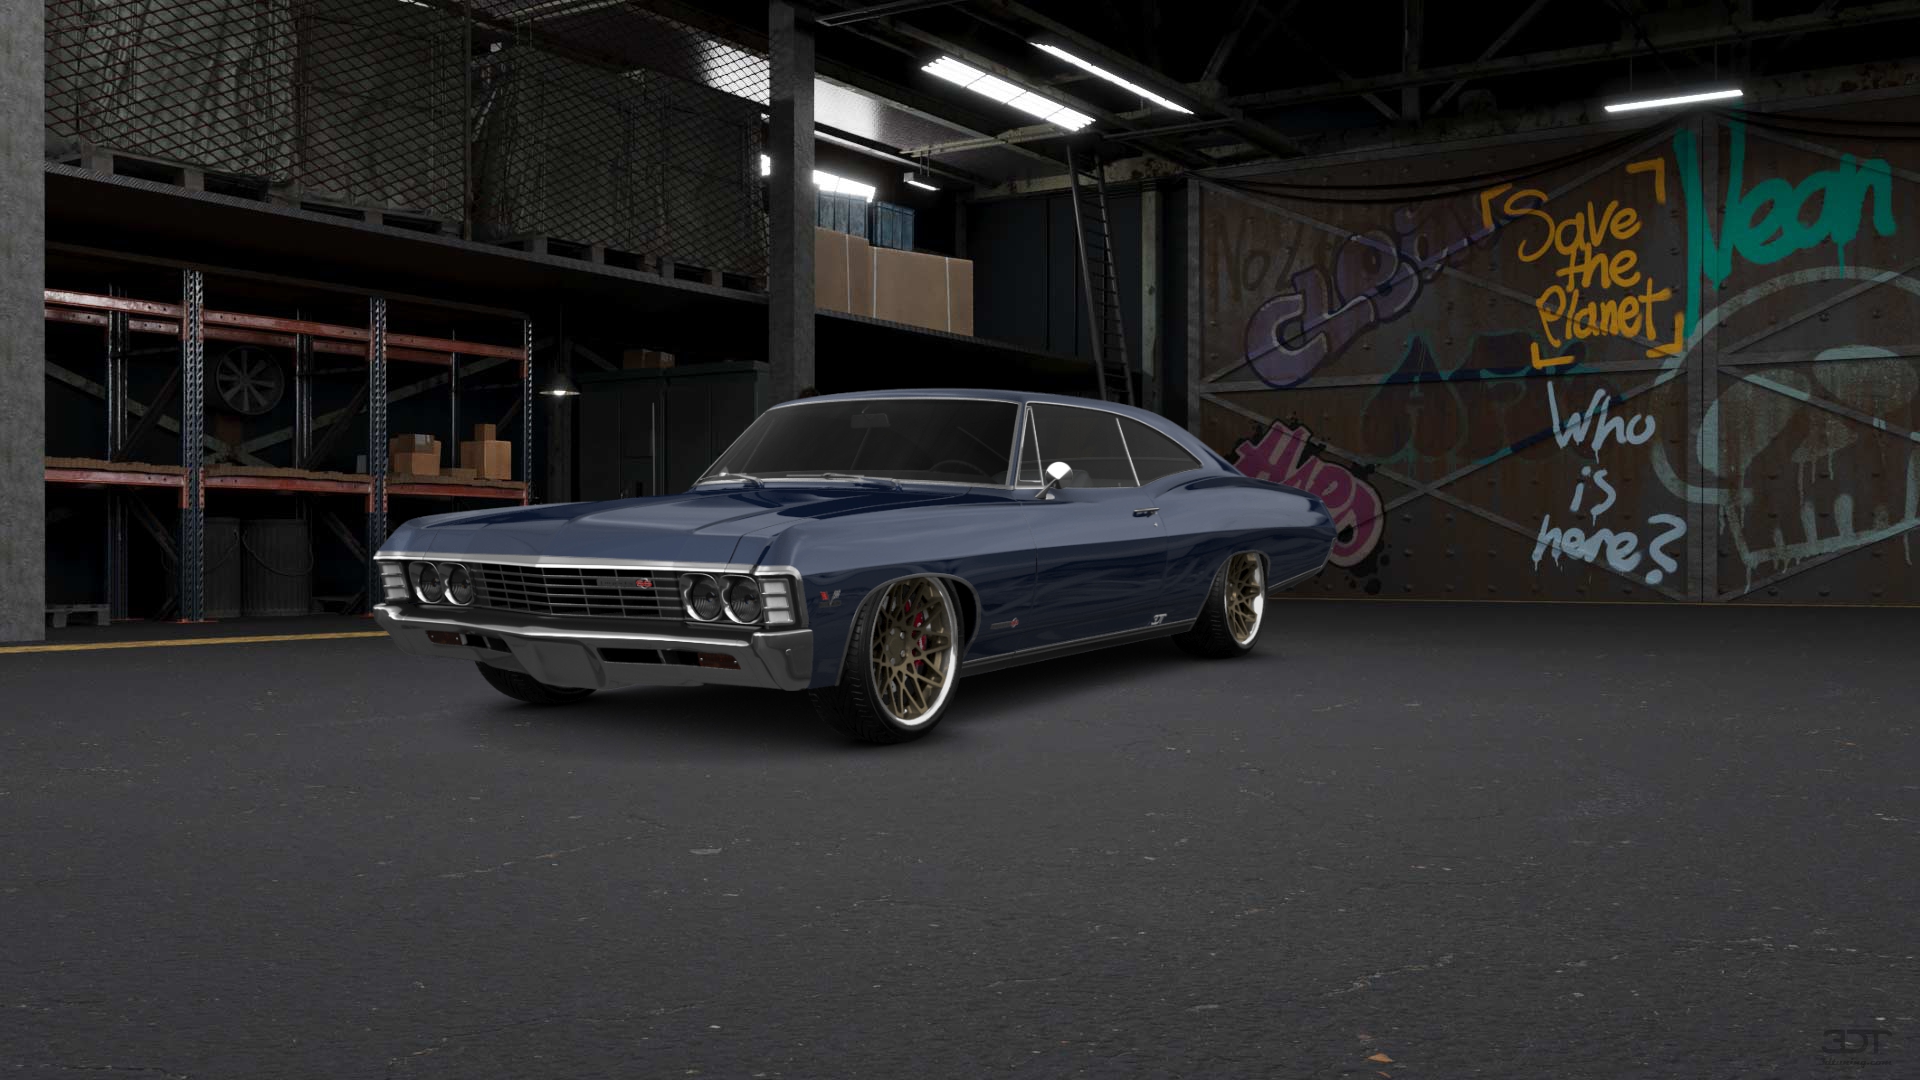 Chevrolet Impala SS 2 Door Coupe 1965 tuning